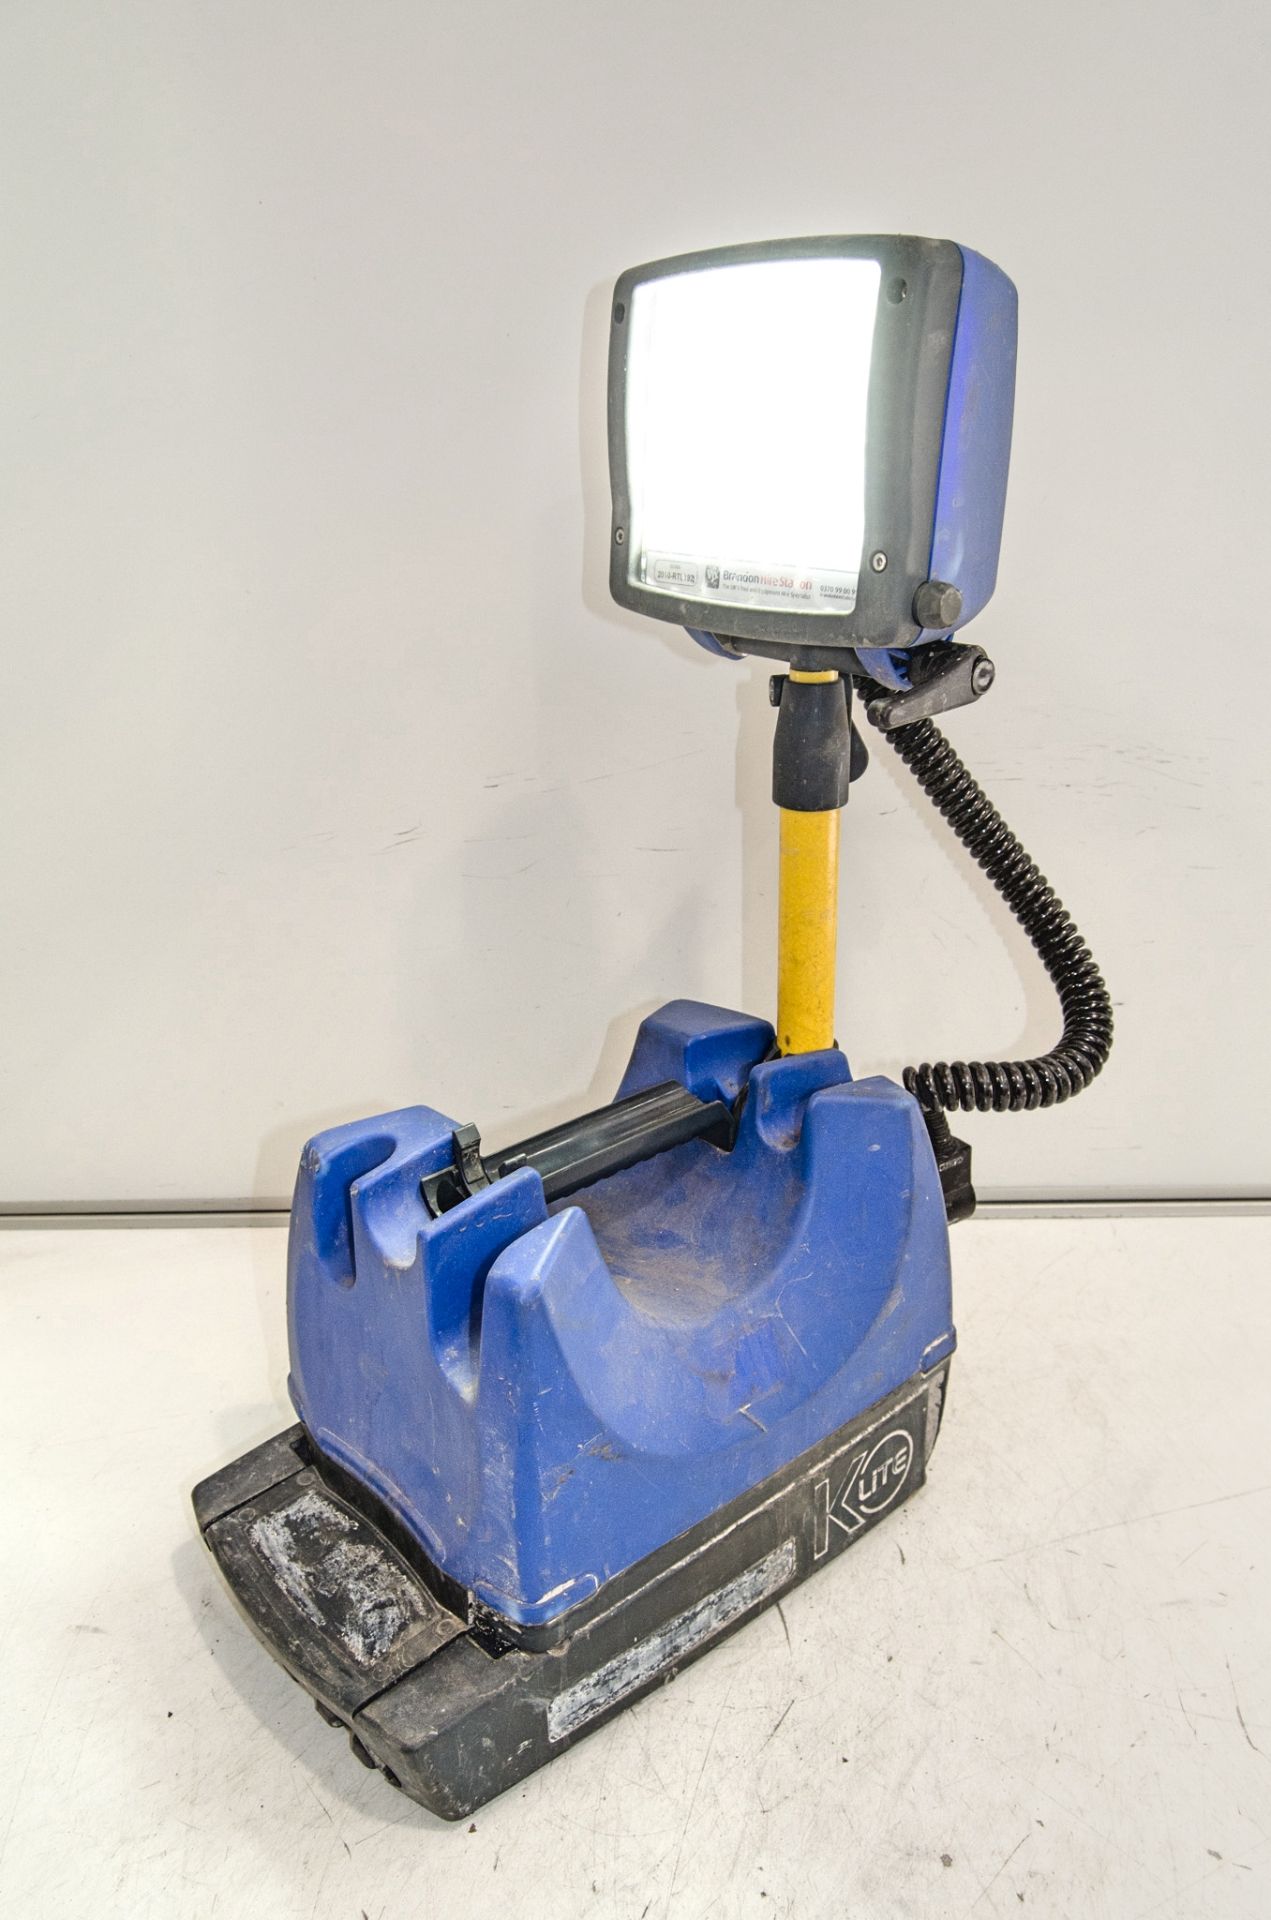 Rite Light K9 LED rechargeable work light ** No charger ** 2010RTL1921